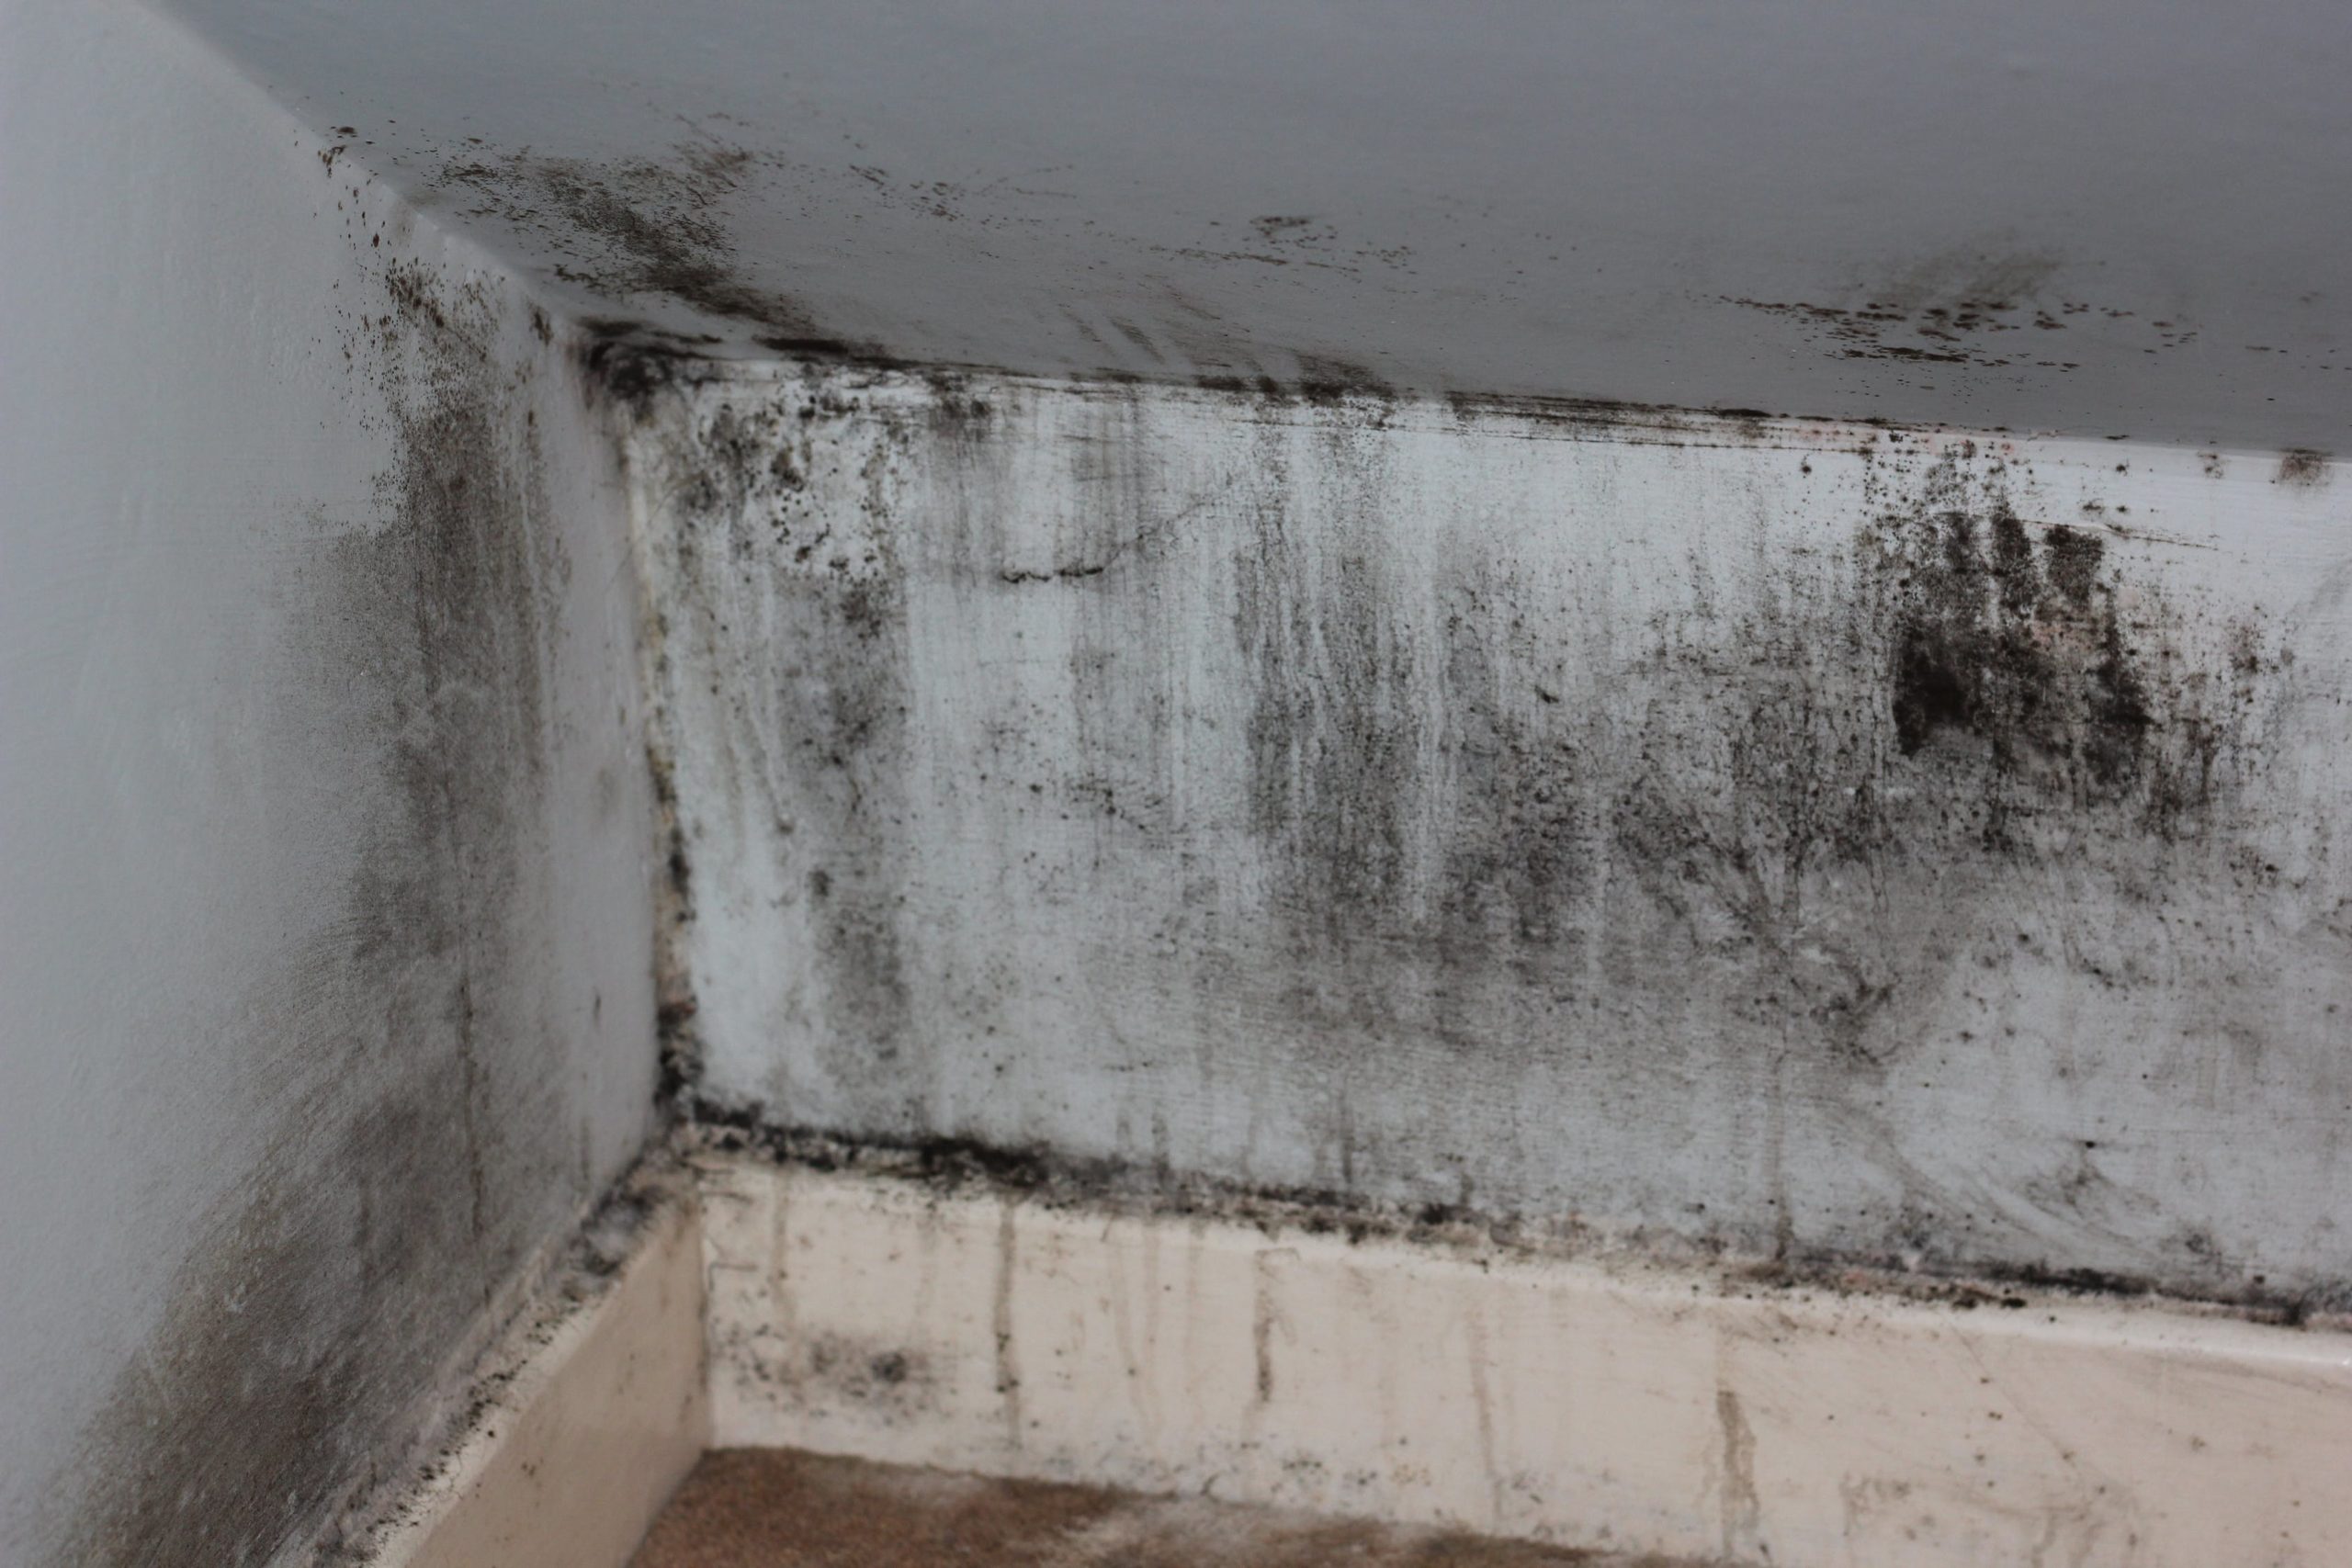 mould growth after water damage to residential property